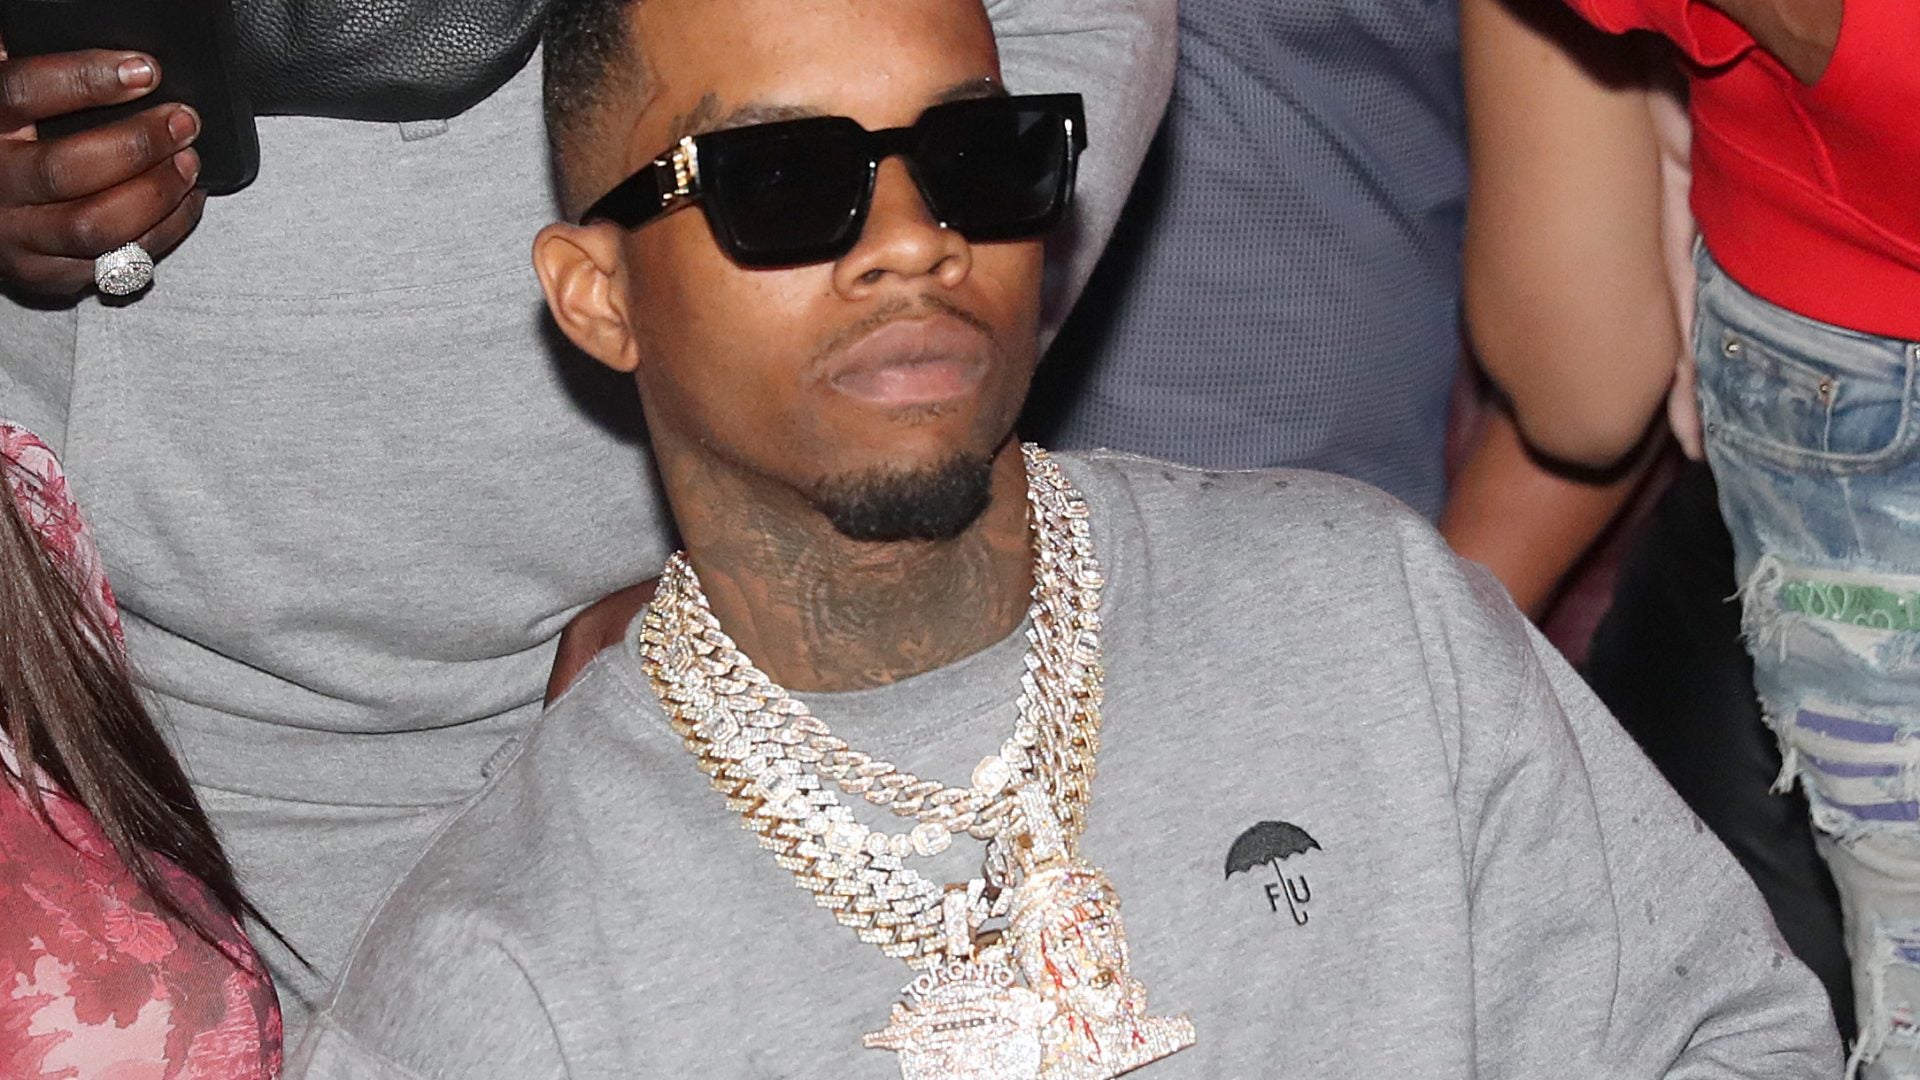 Prosecutors Request 13-Year Prison Sentence For Tory Lanez Citing Campaign To "Re-Traumatize" Megan Thee Stallion